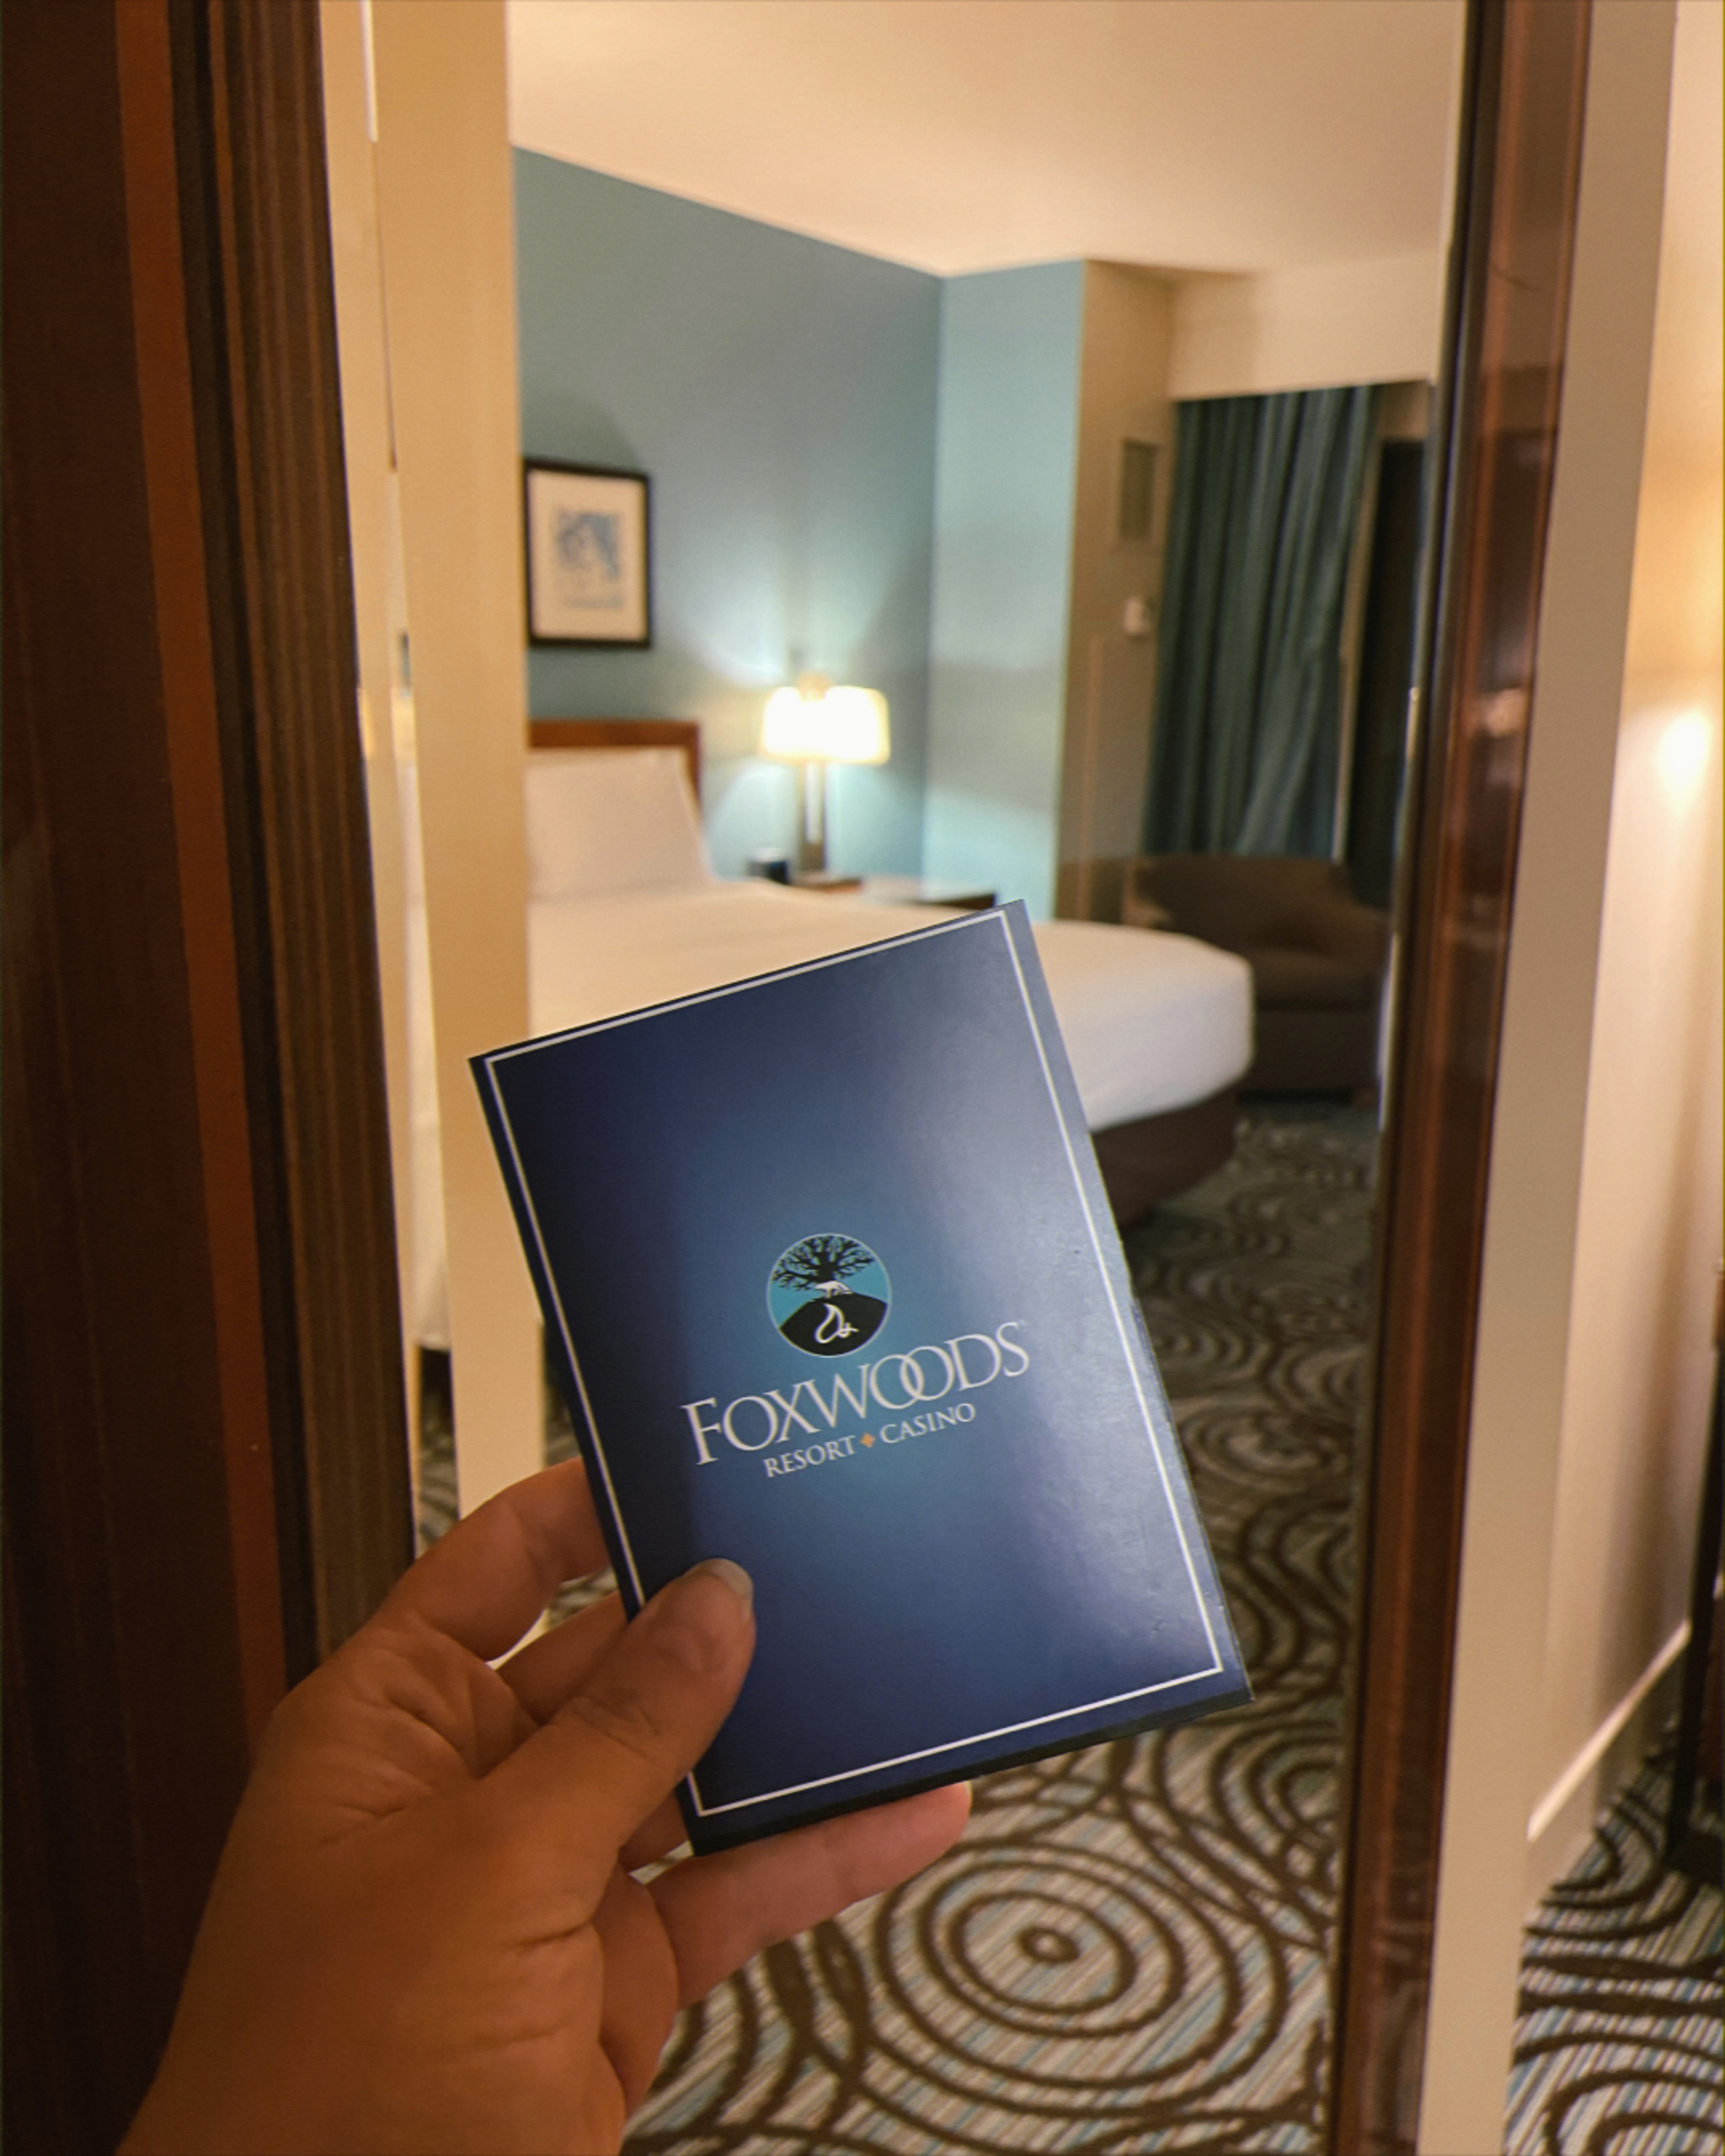 How To Have An Epic Experience at Foxwoods Resort Guide | Girls Trip To Foxwoods Resort || 48 Hours at Foxwoods | The Perfect Weekend Itinerary | Best Things to Do in Connecticut | Explore Foxwoods Resort Casino | Two Days at Foxwoods Resort | Foxwoods Travel Guide | Top Things to do at Foxwoods Resort | Foxwoods Resort Travel Guide | Room Key | Simply by Simone